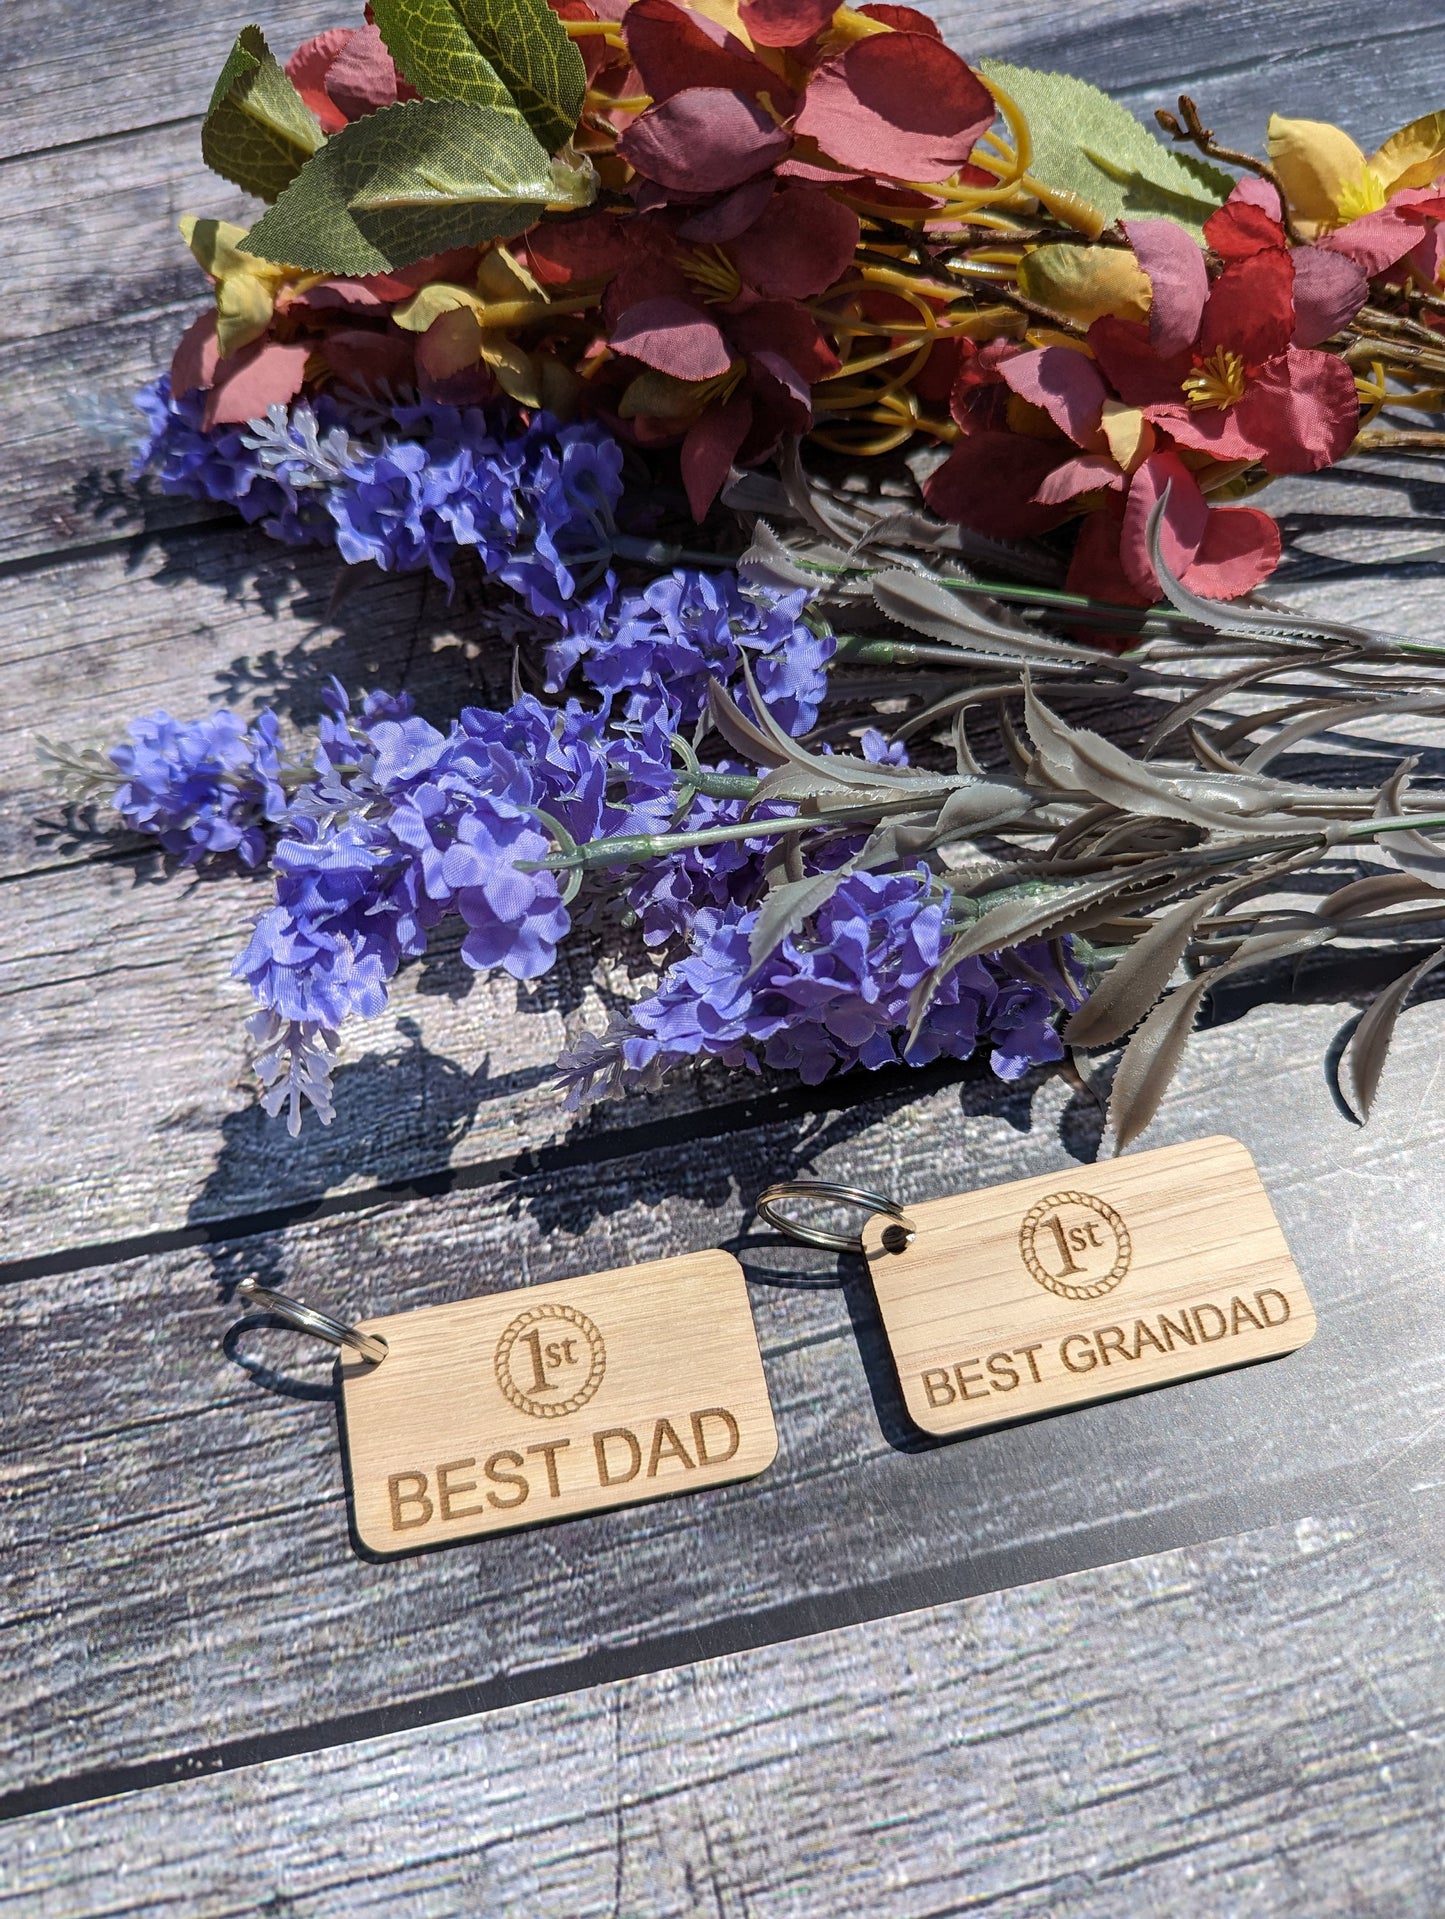 Best Dad & Best Grandad Keyrings, Birthday Gift for Dad, Grandad, Father's Day Gift